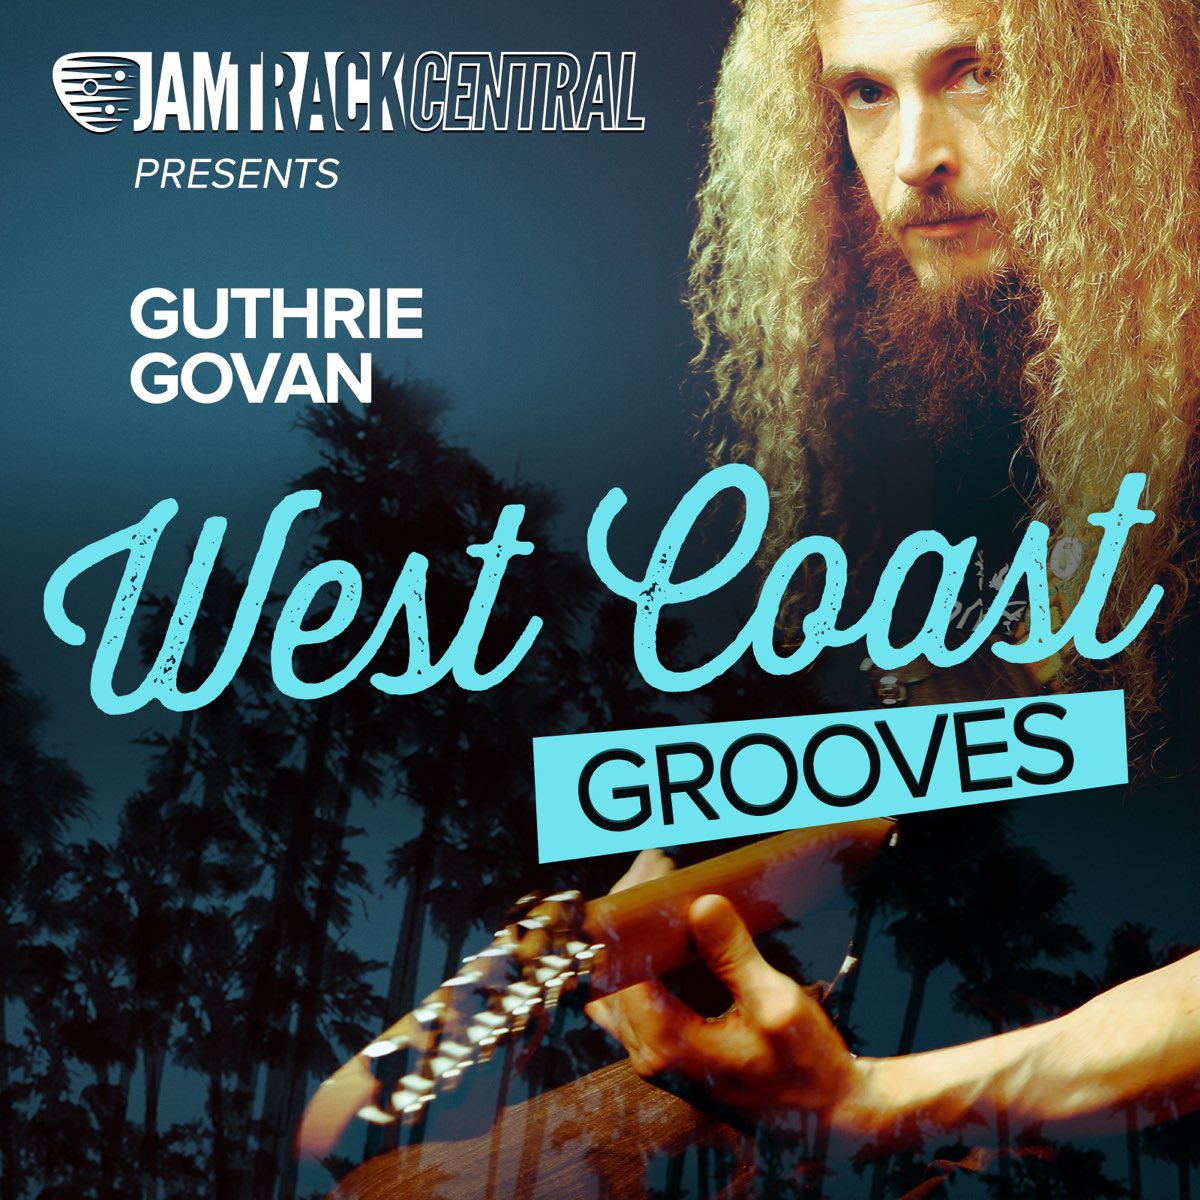 ‎West Coast Grooves by Guthrie Govan on iTunes